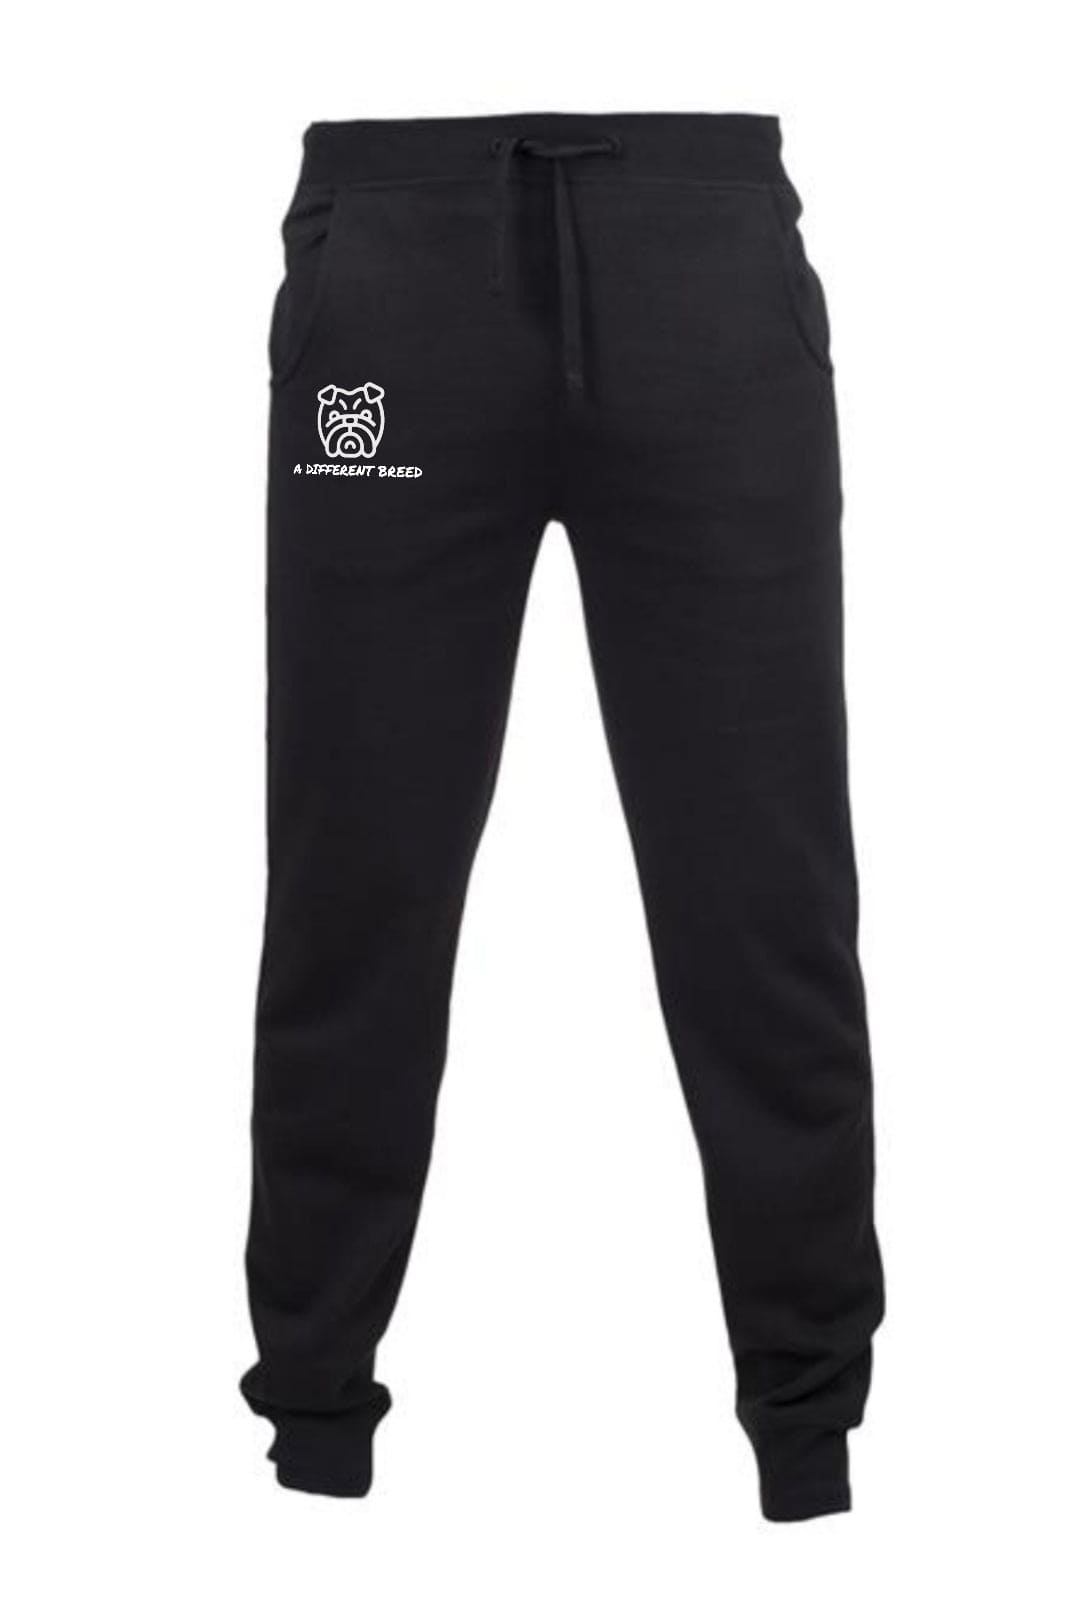 Black jogging bottoms with a cuff bottom and the a different breed logo in white print